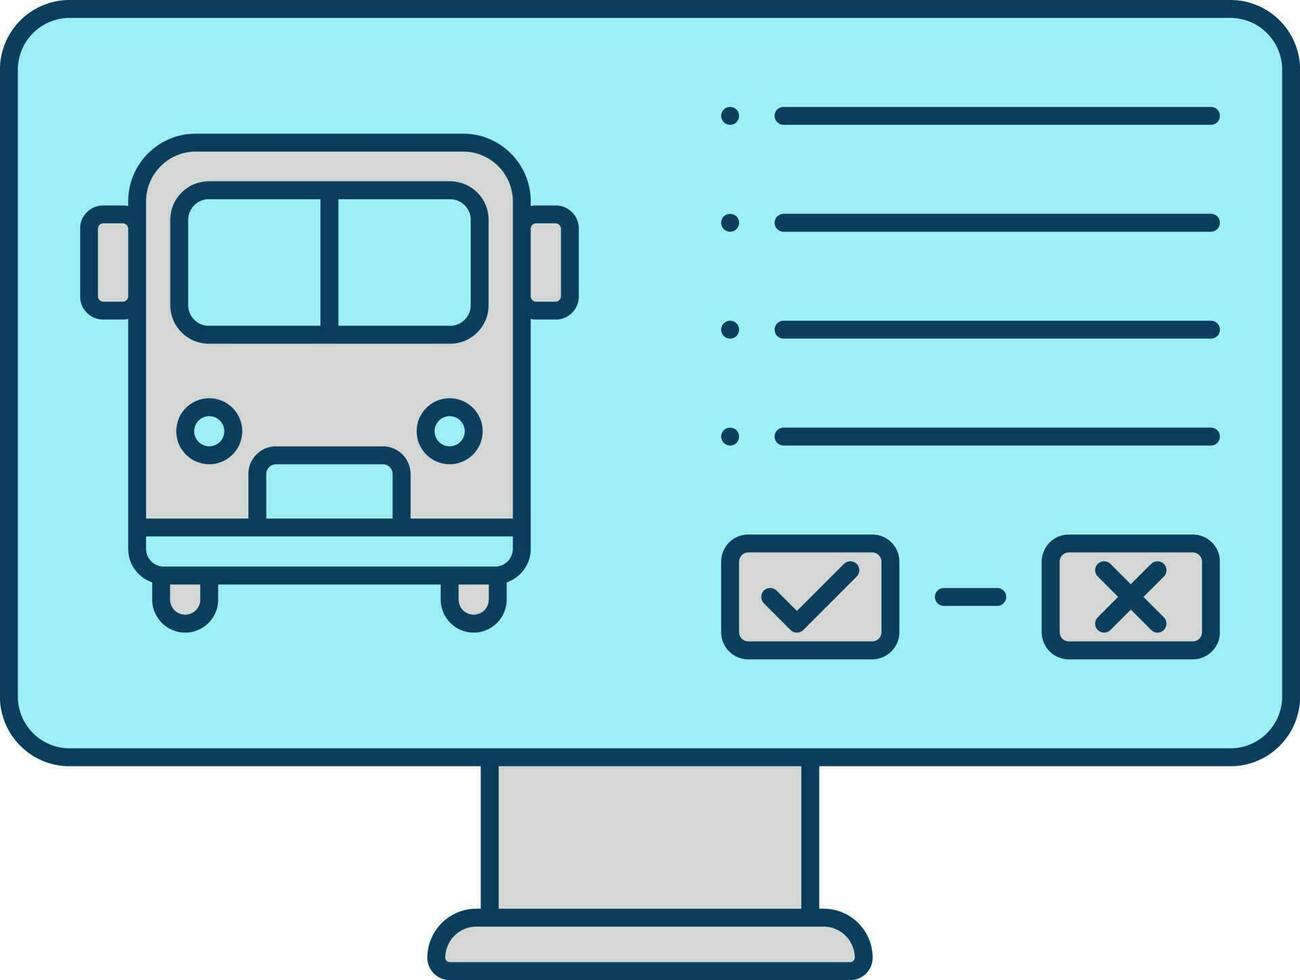 Pending Bus Reservation Review In Monitor Screen Turquoise And Grey Icon. vector